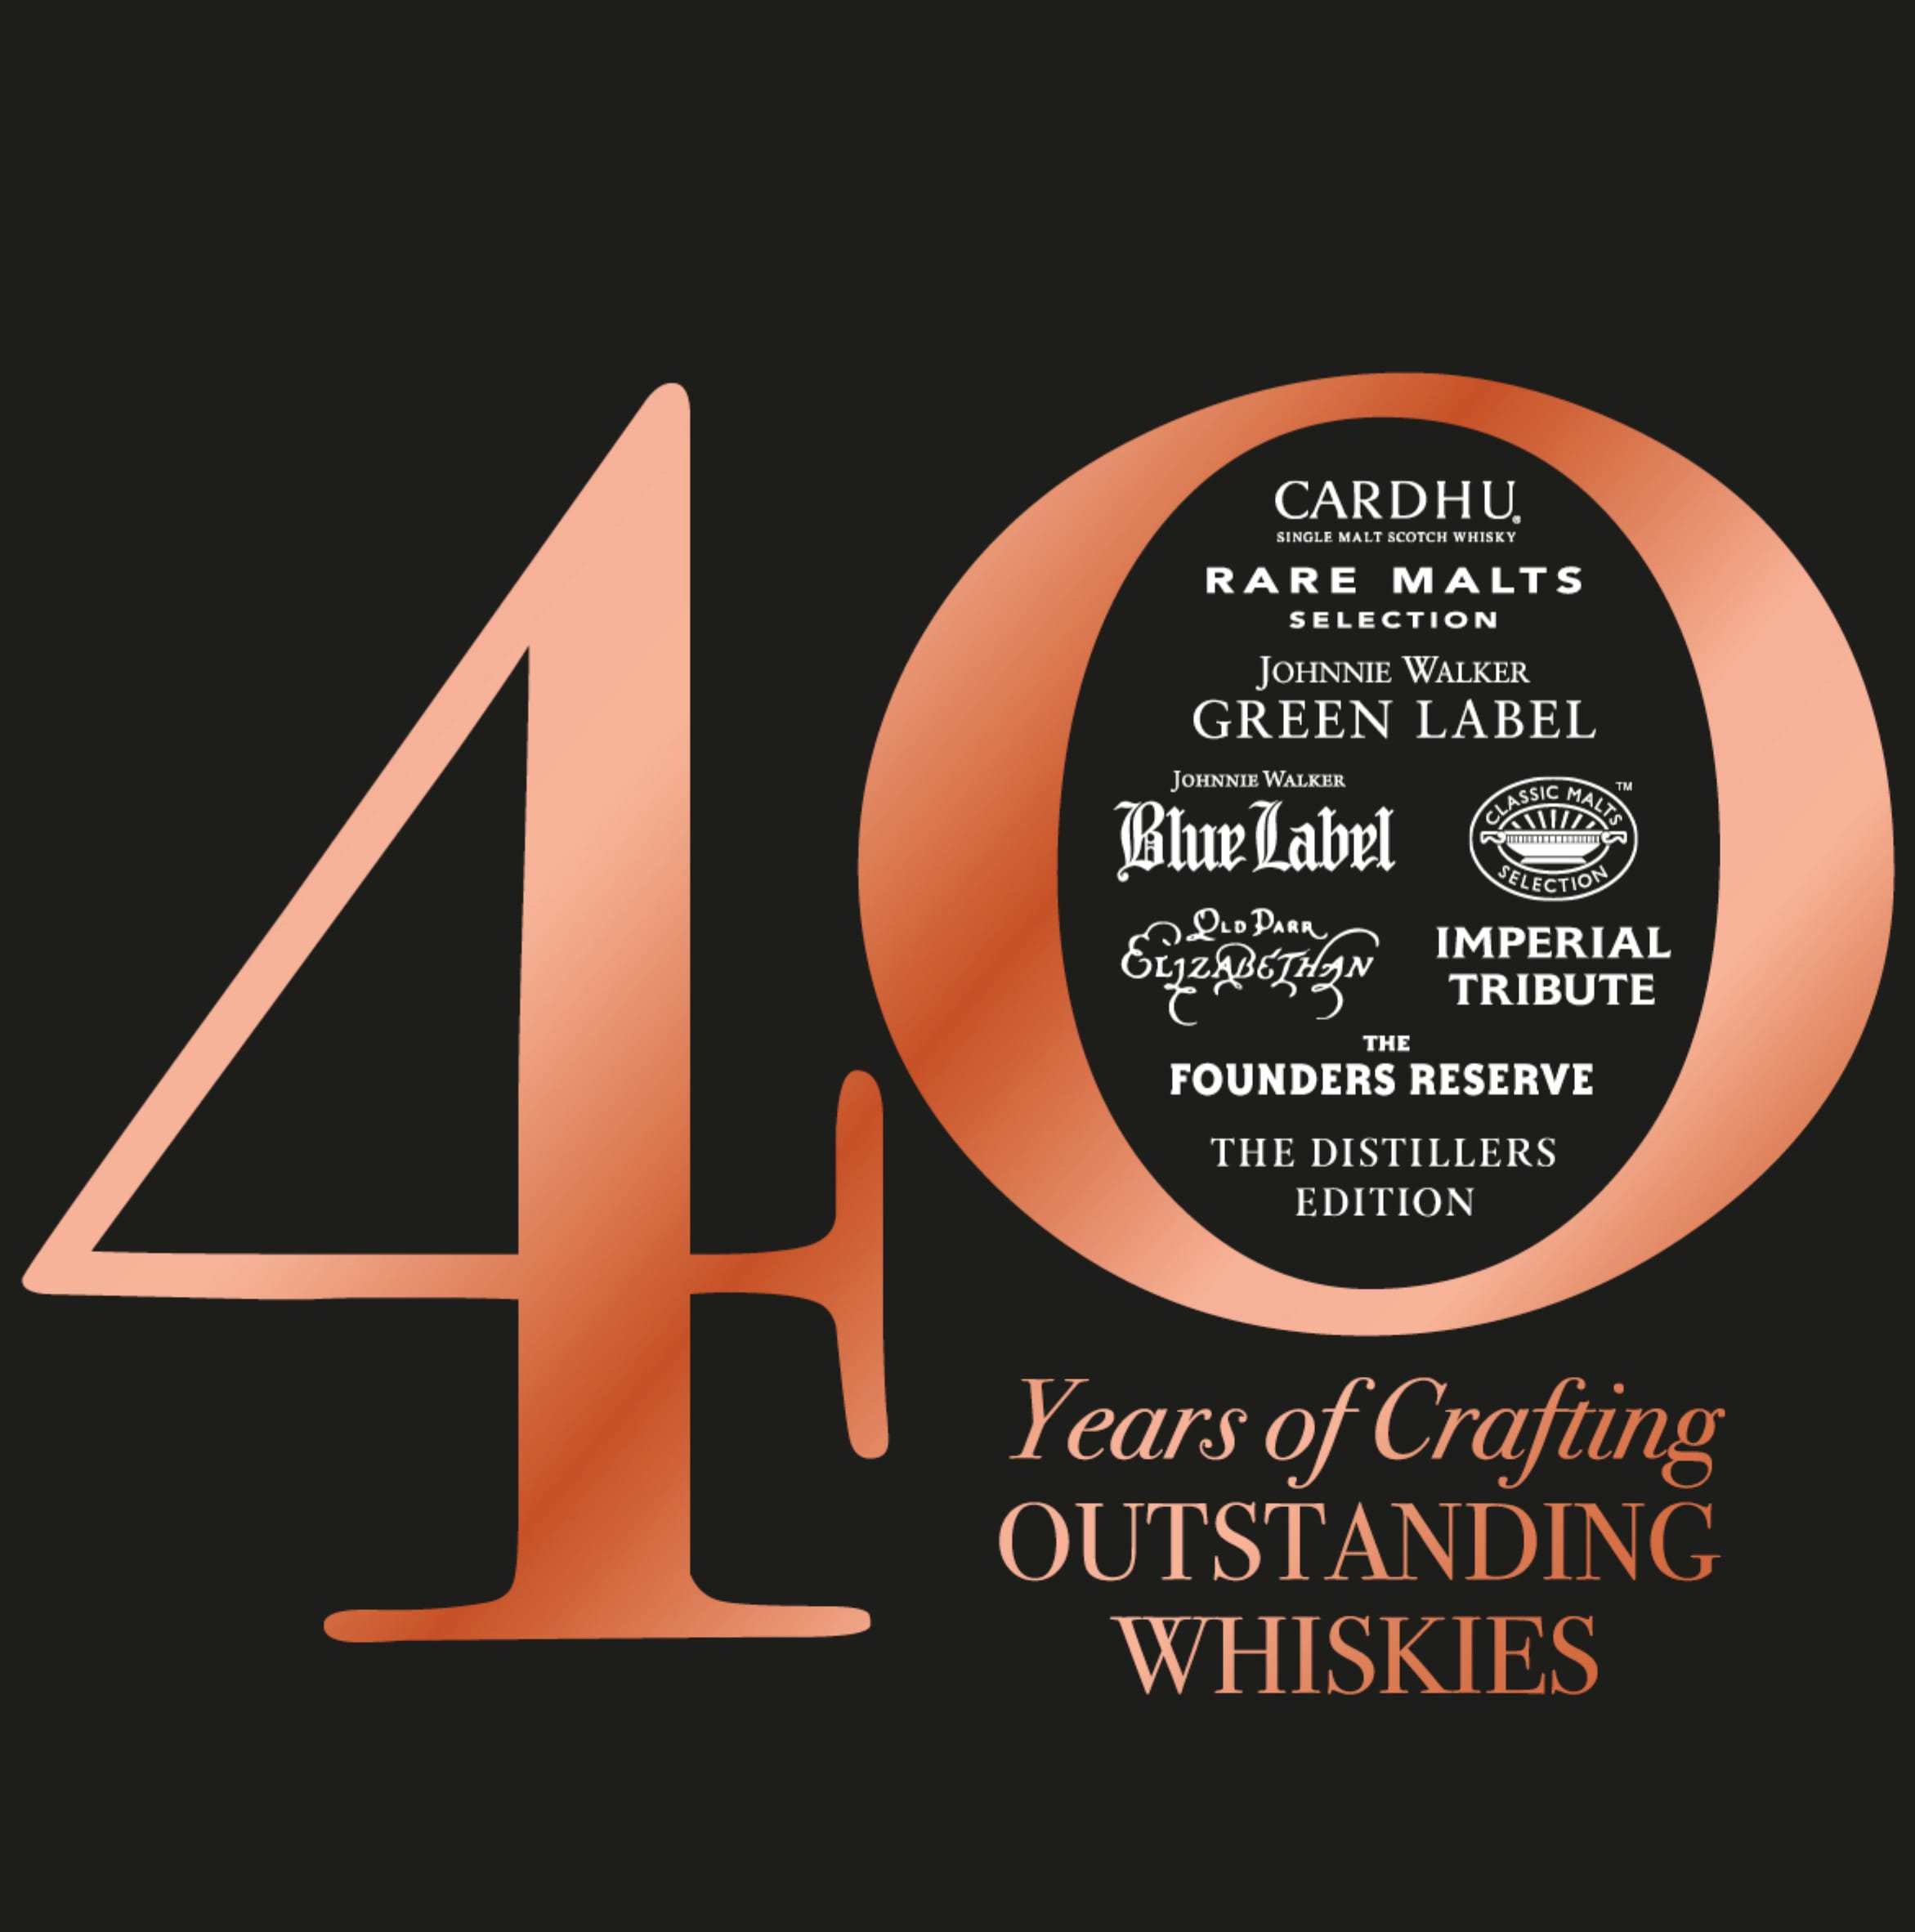 Mike Collings has 40 years experience crafting the world's best whisky 